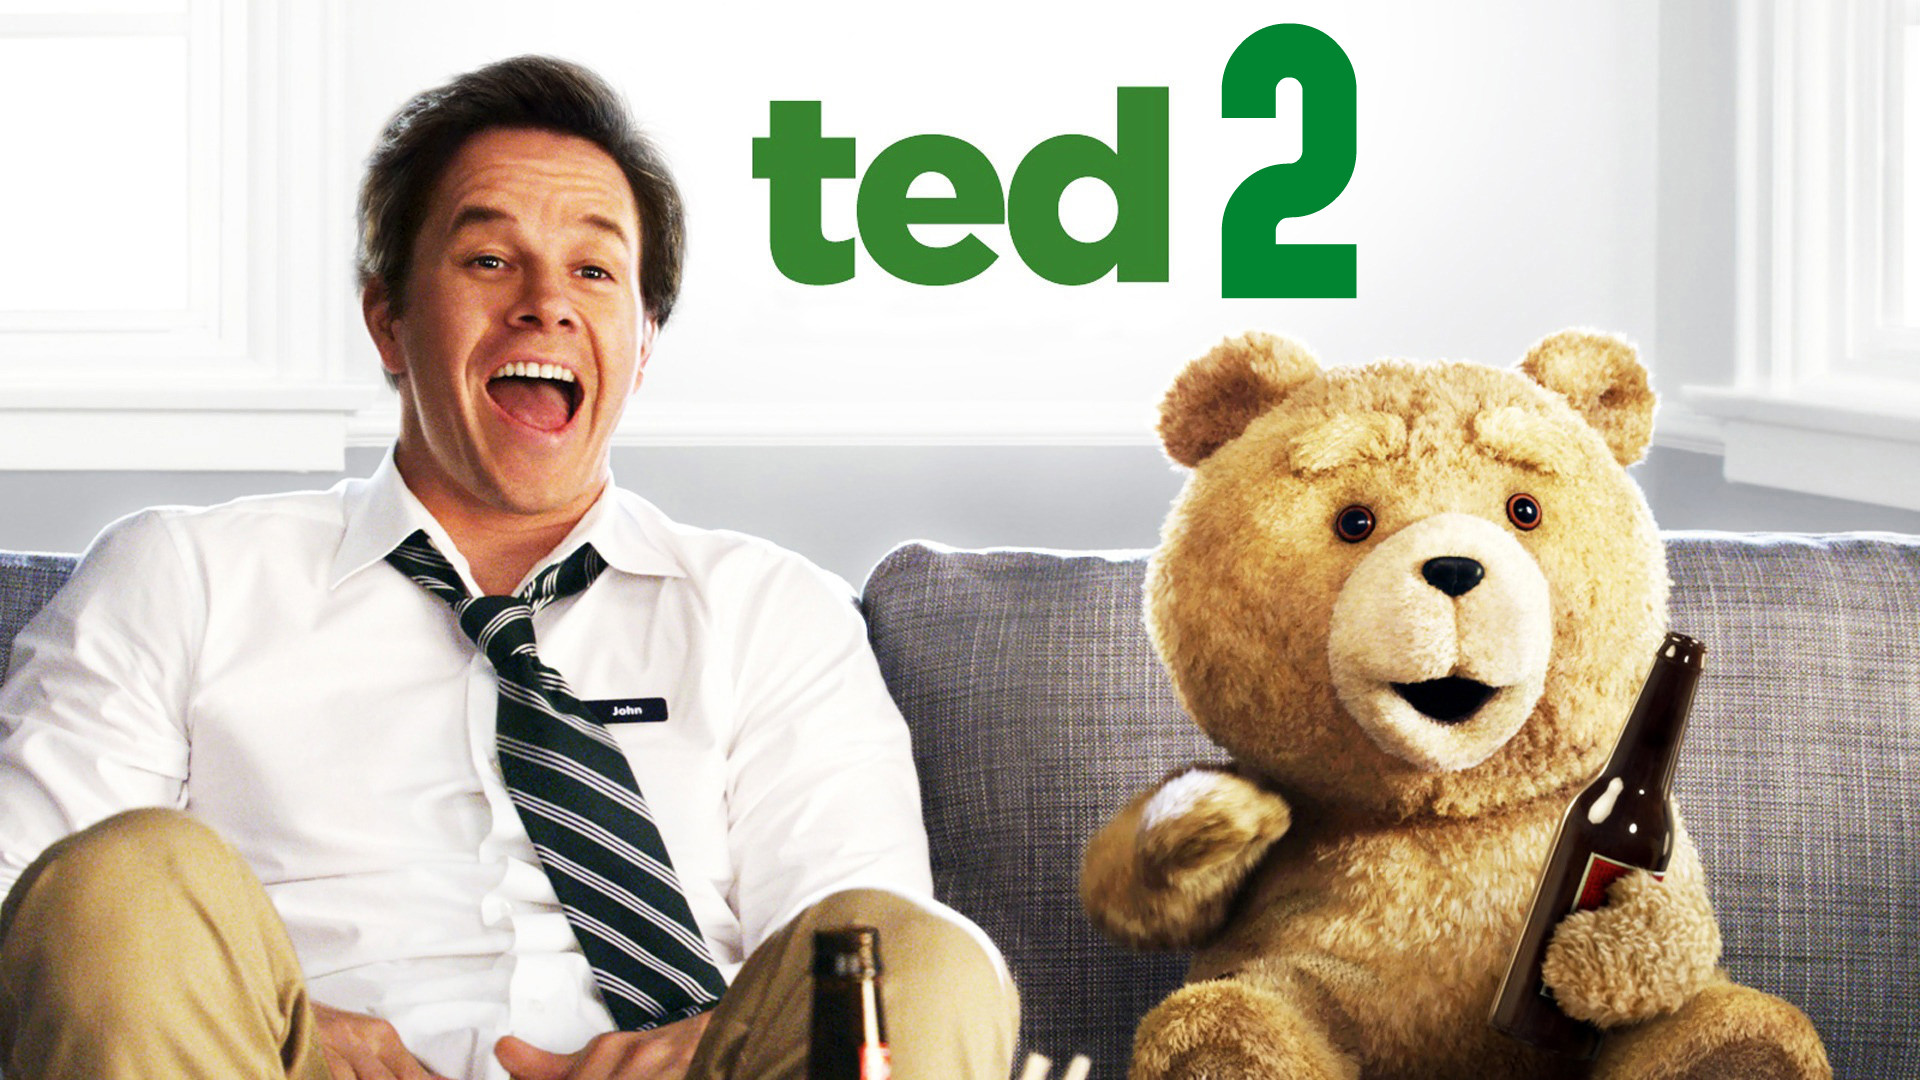 Ted 2 #21